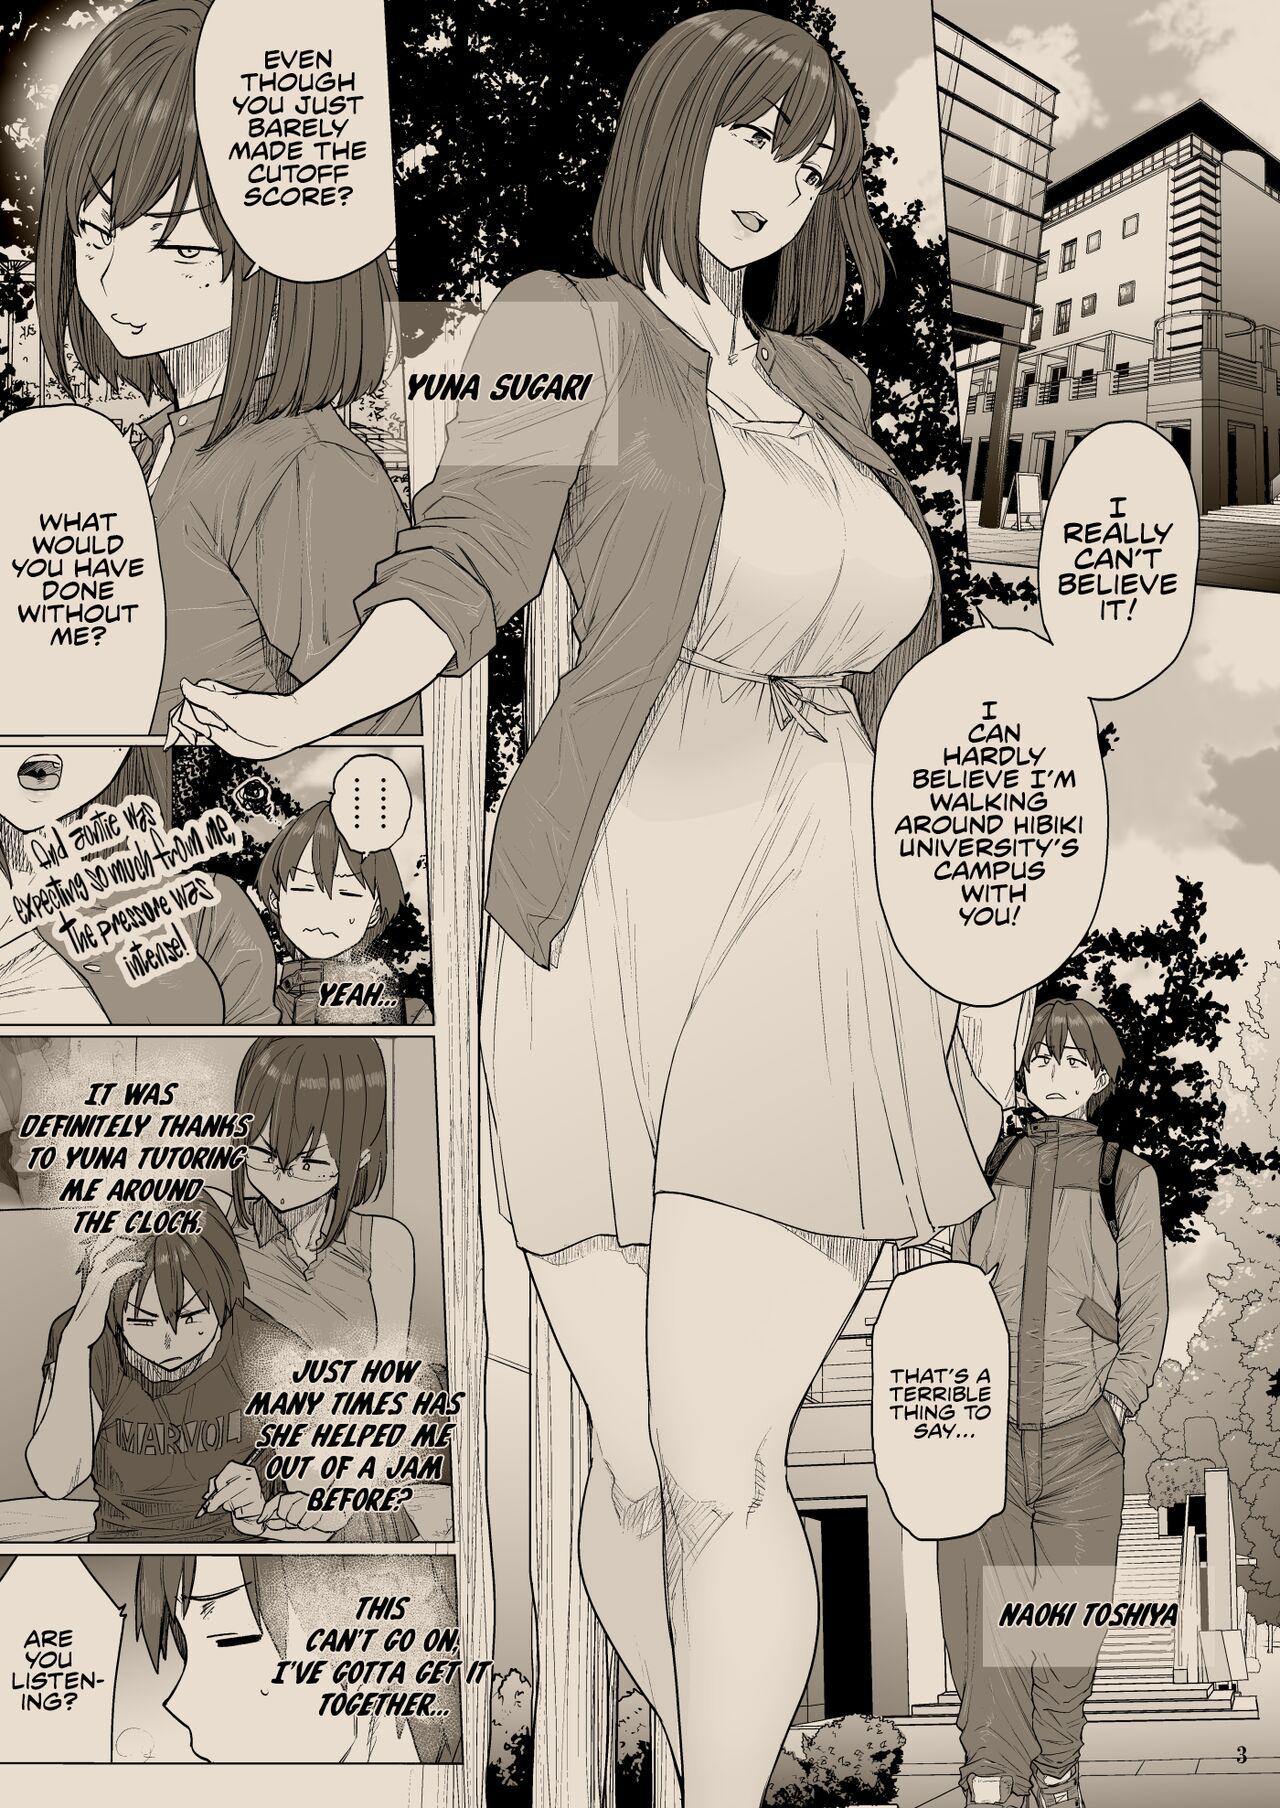 Blows B.S.S.² - My Smart, Beautiful Childhood Friend That I Loved First Became an Assistant of an Upperclassman’s Club and He Did Whatever He Pleased to Her - Original Amateur Cum - Page 2